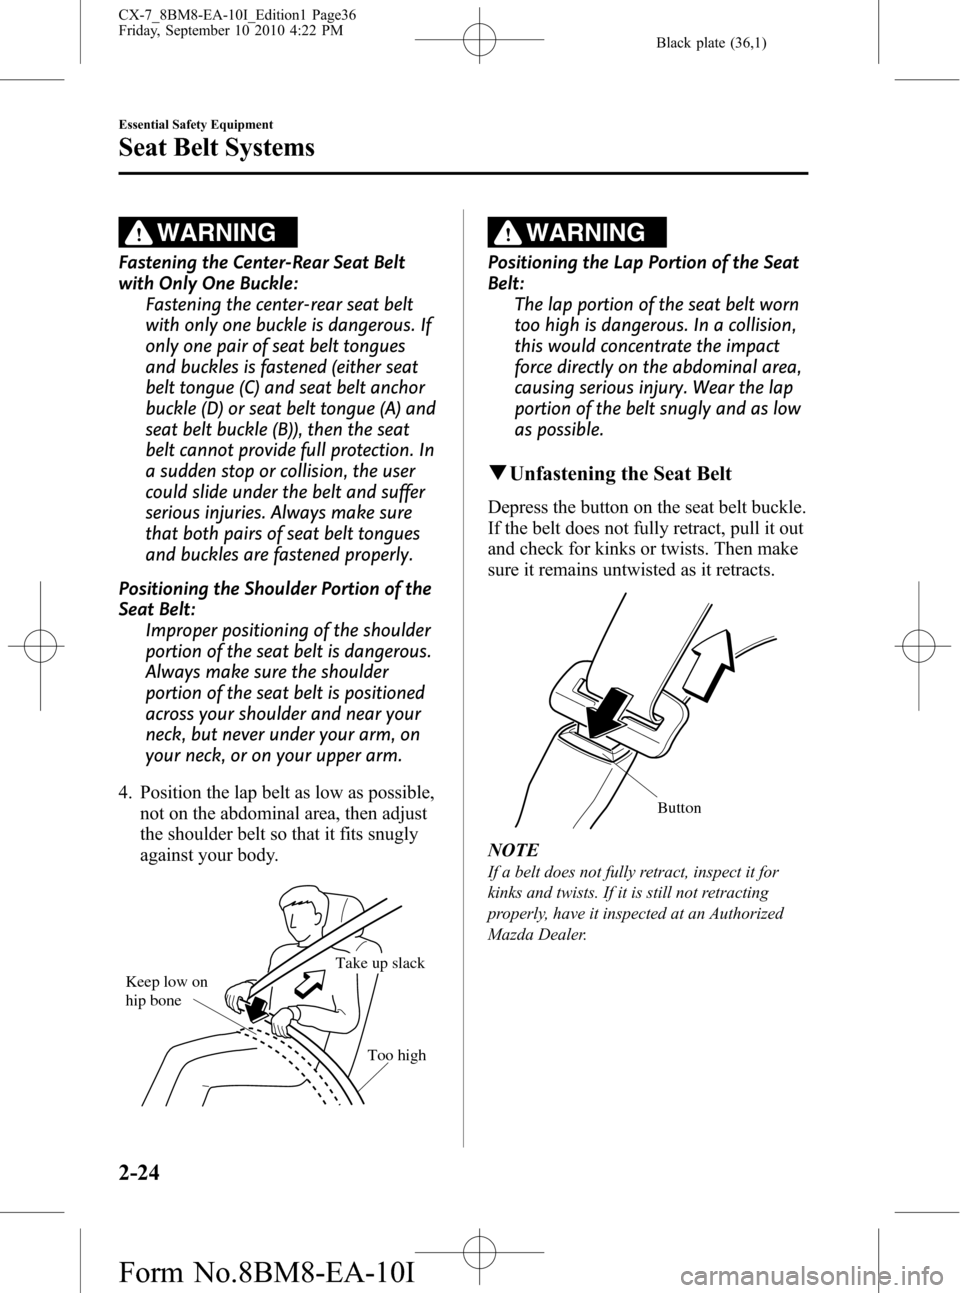 MAZDA MODEL CX-7 2011   (in English) Owners Guide Black plate (36,1)
WARNING
Fastening the Center-Rear Seat Belt
with Only One Buckle:
Fastening the center-rear seat belt
with only one buckle is dangerous. If
only one pair of seat belt tongues
and bu